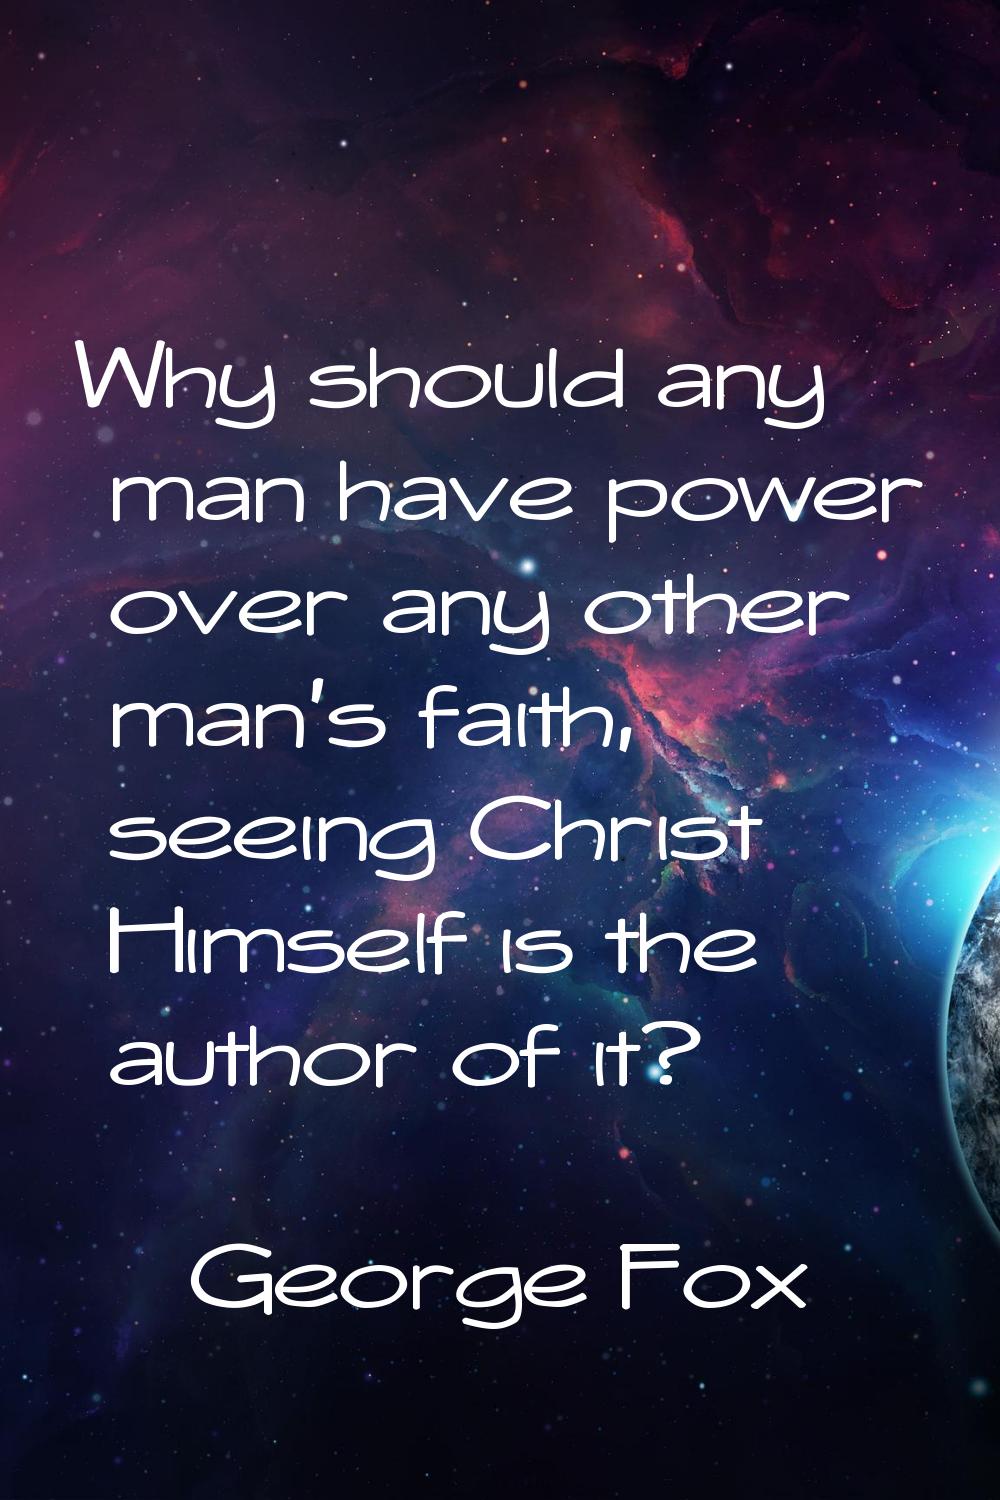 Why should any man have power over any other man's faith, seeing Christ Himself is the author of it